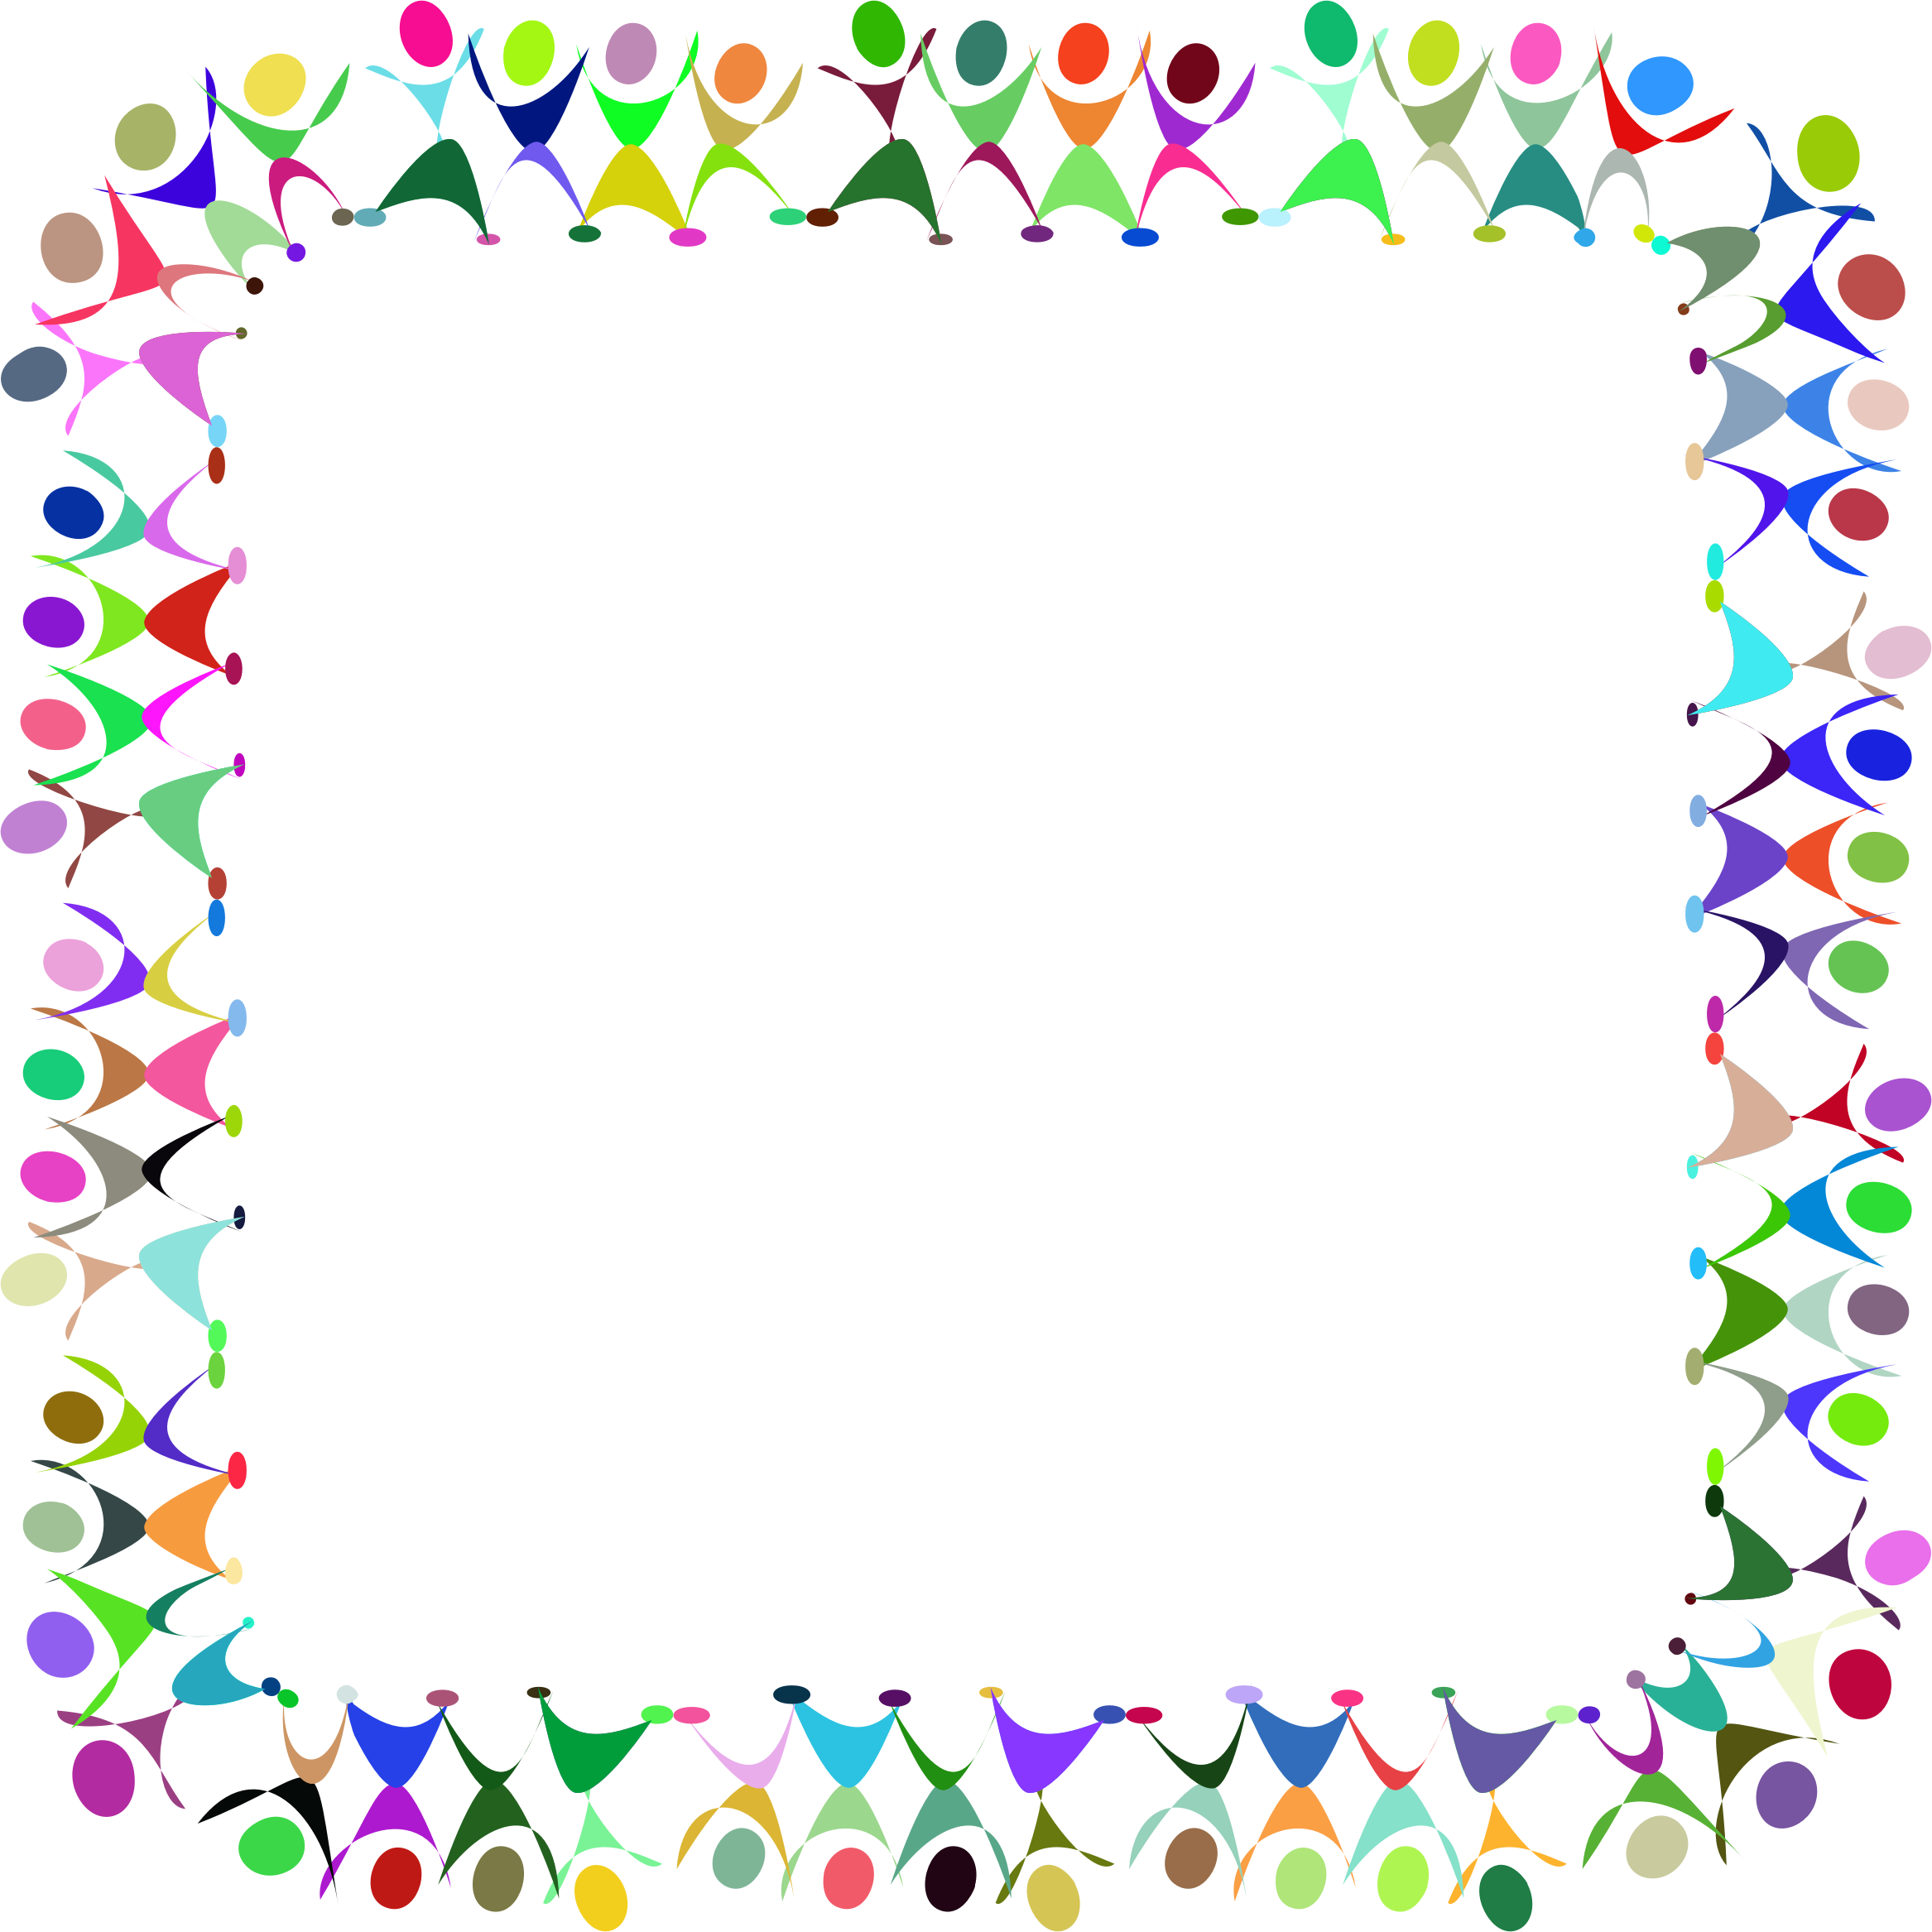 People square prismatic big. Dancing clipart heart